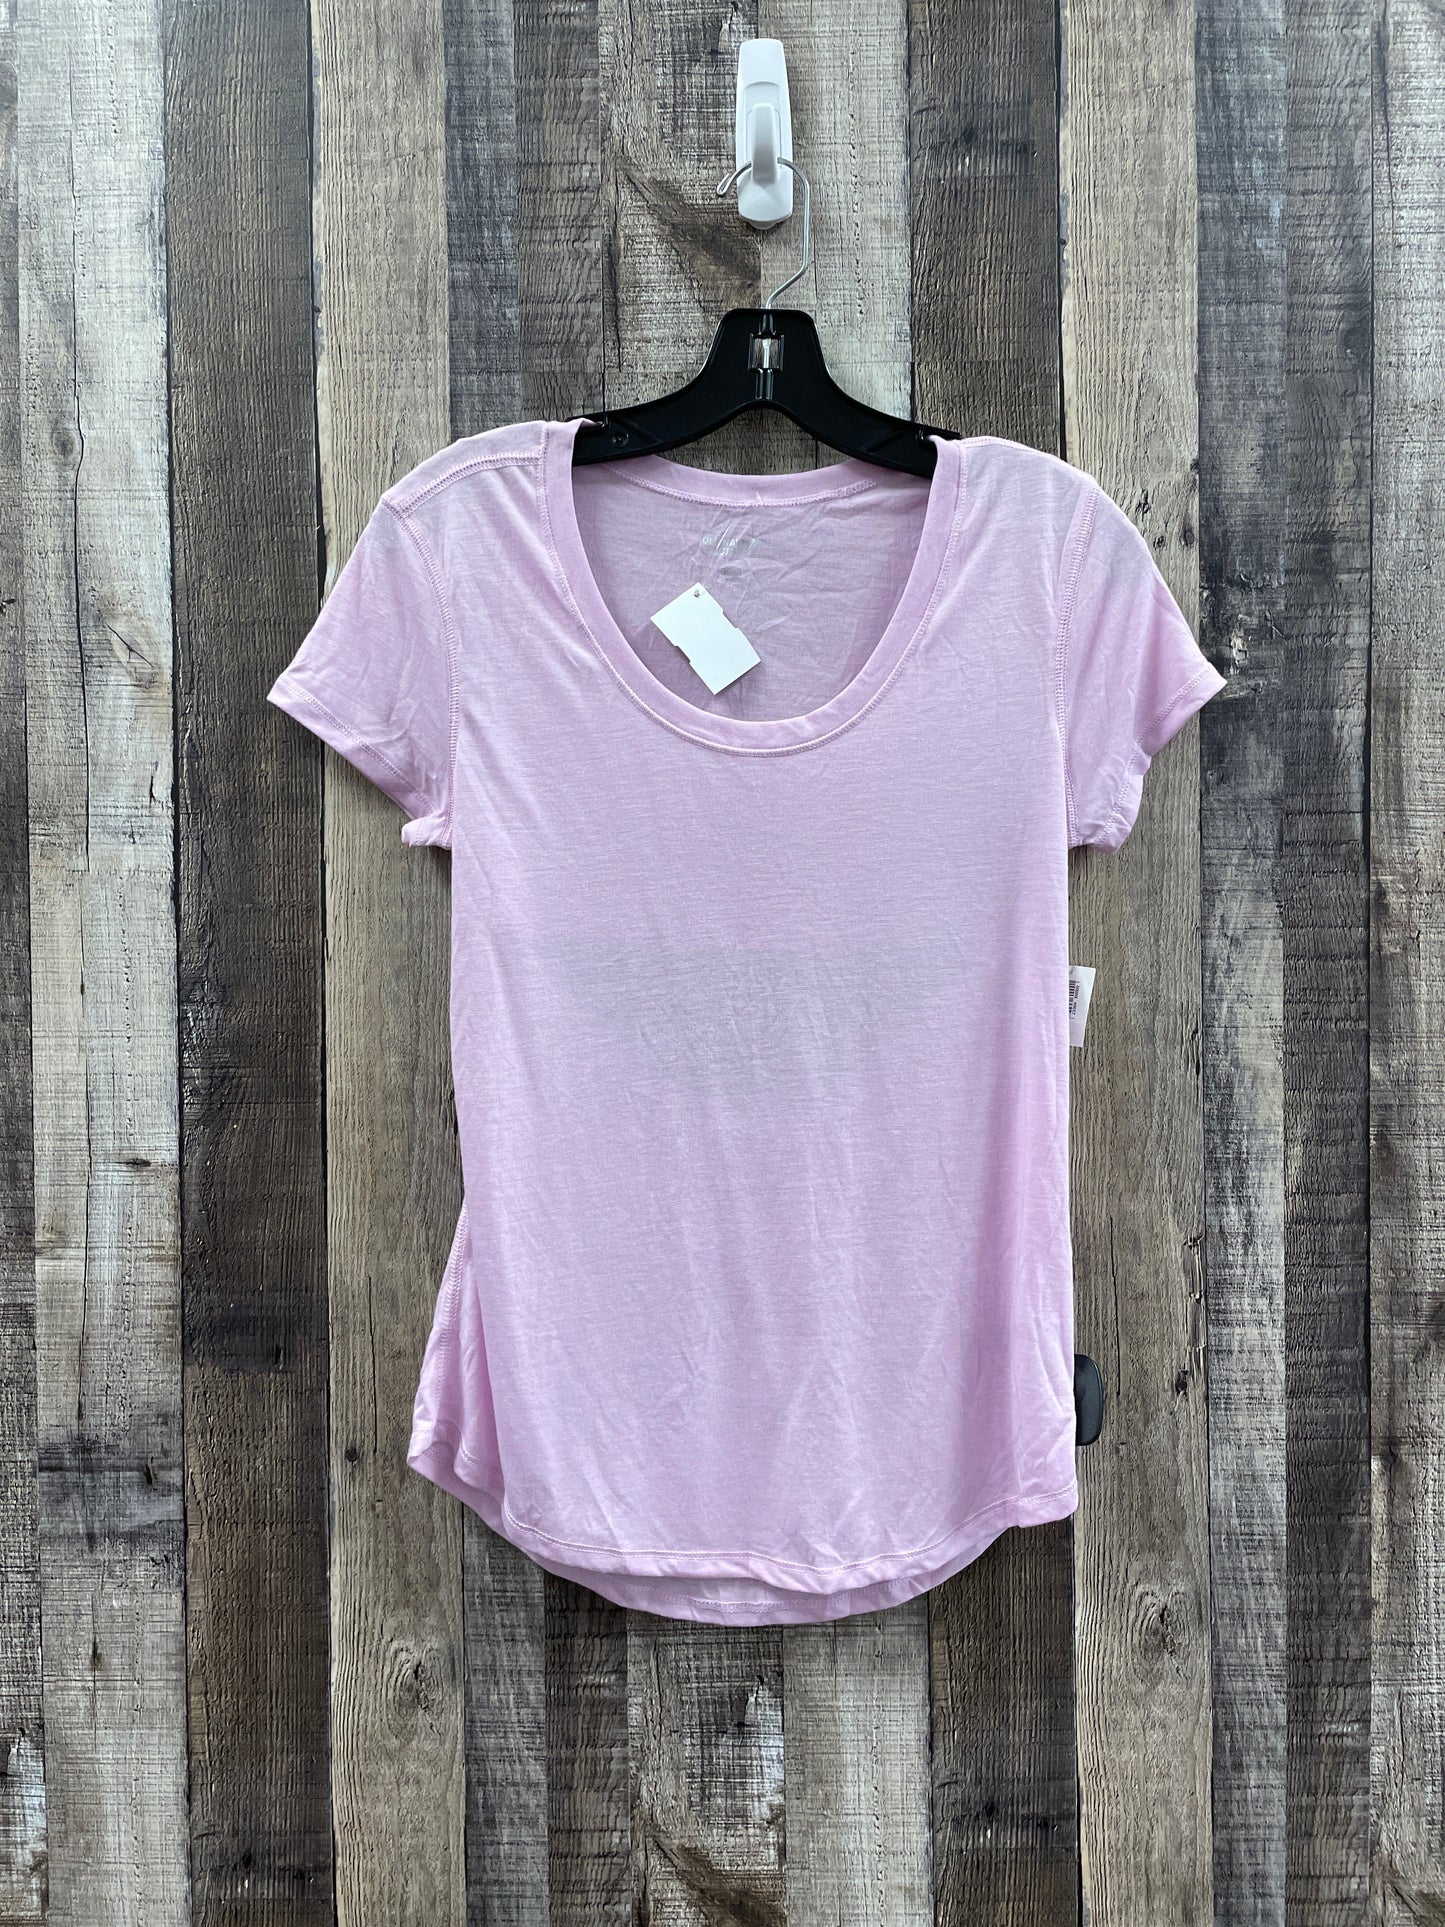 Purple Top Short Sleeve Old Navy, Size Xs